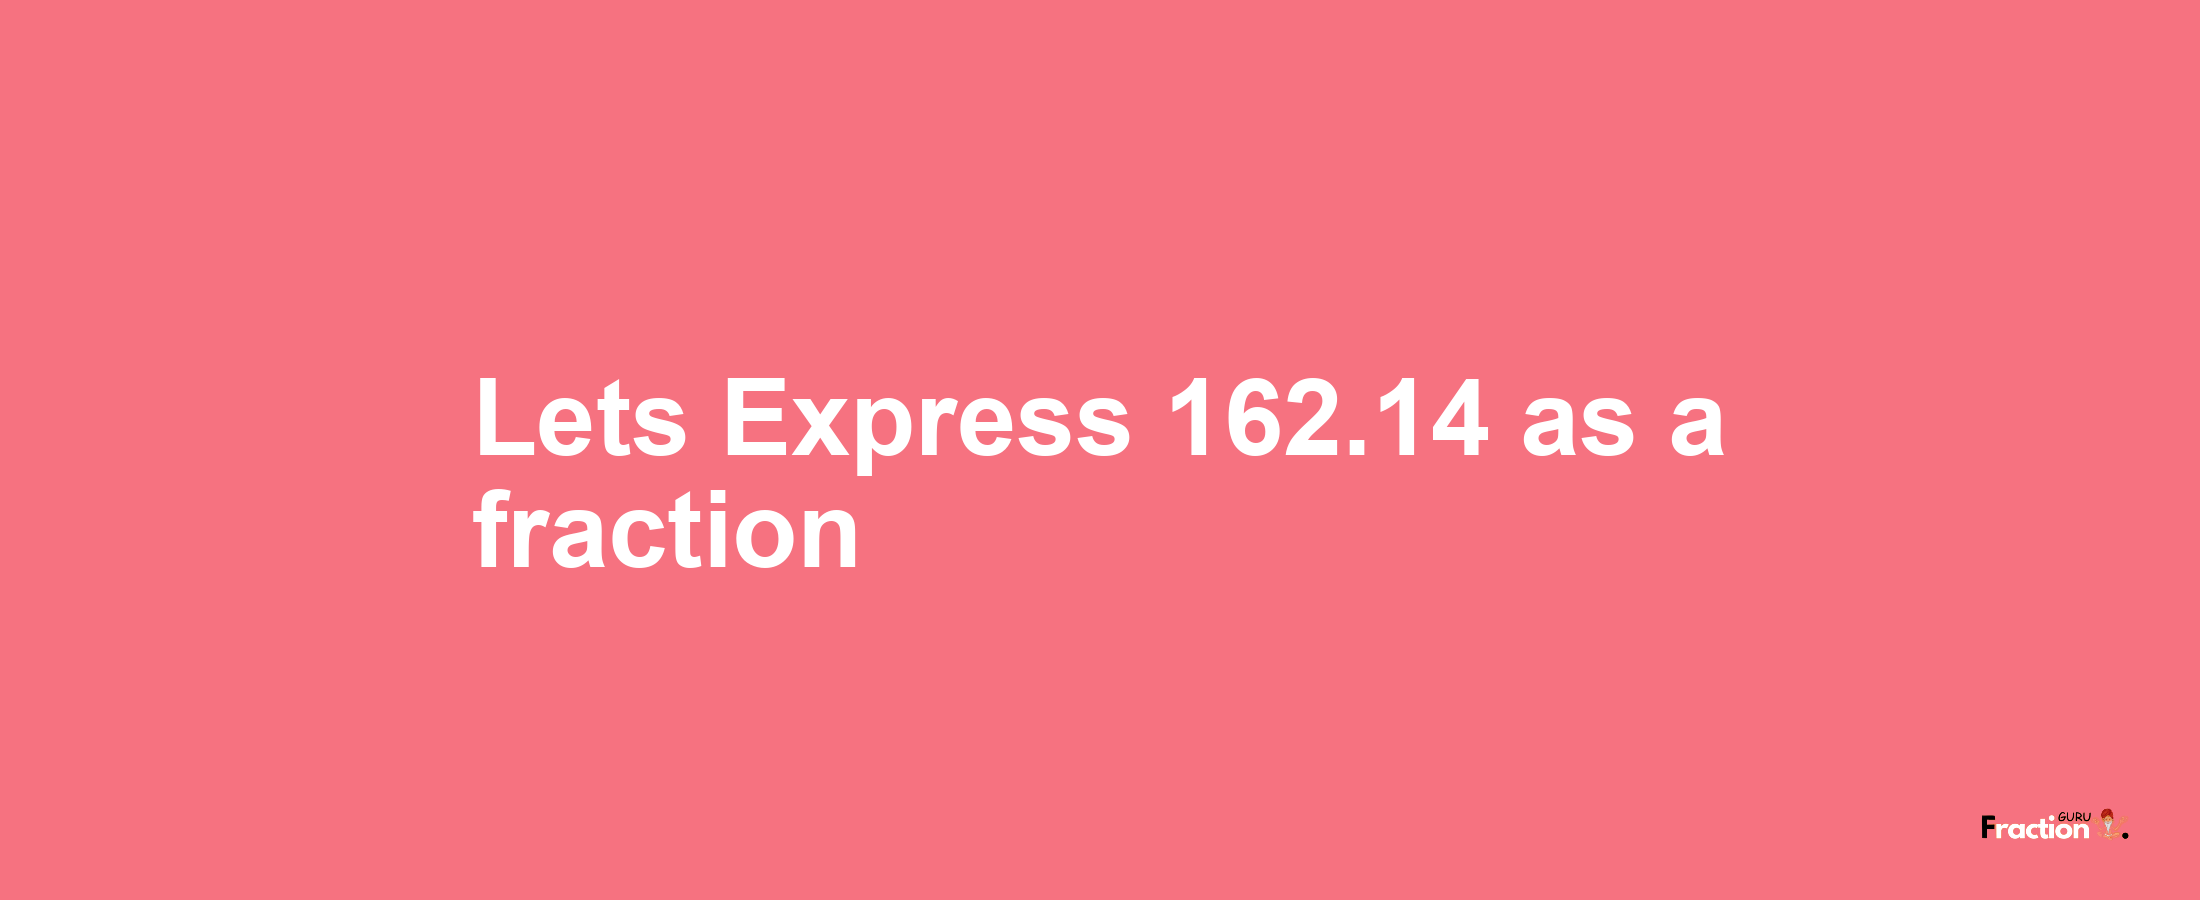 Lets Express 162.14 as afraction